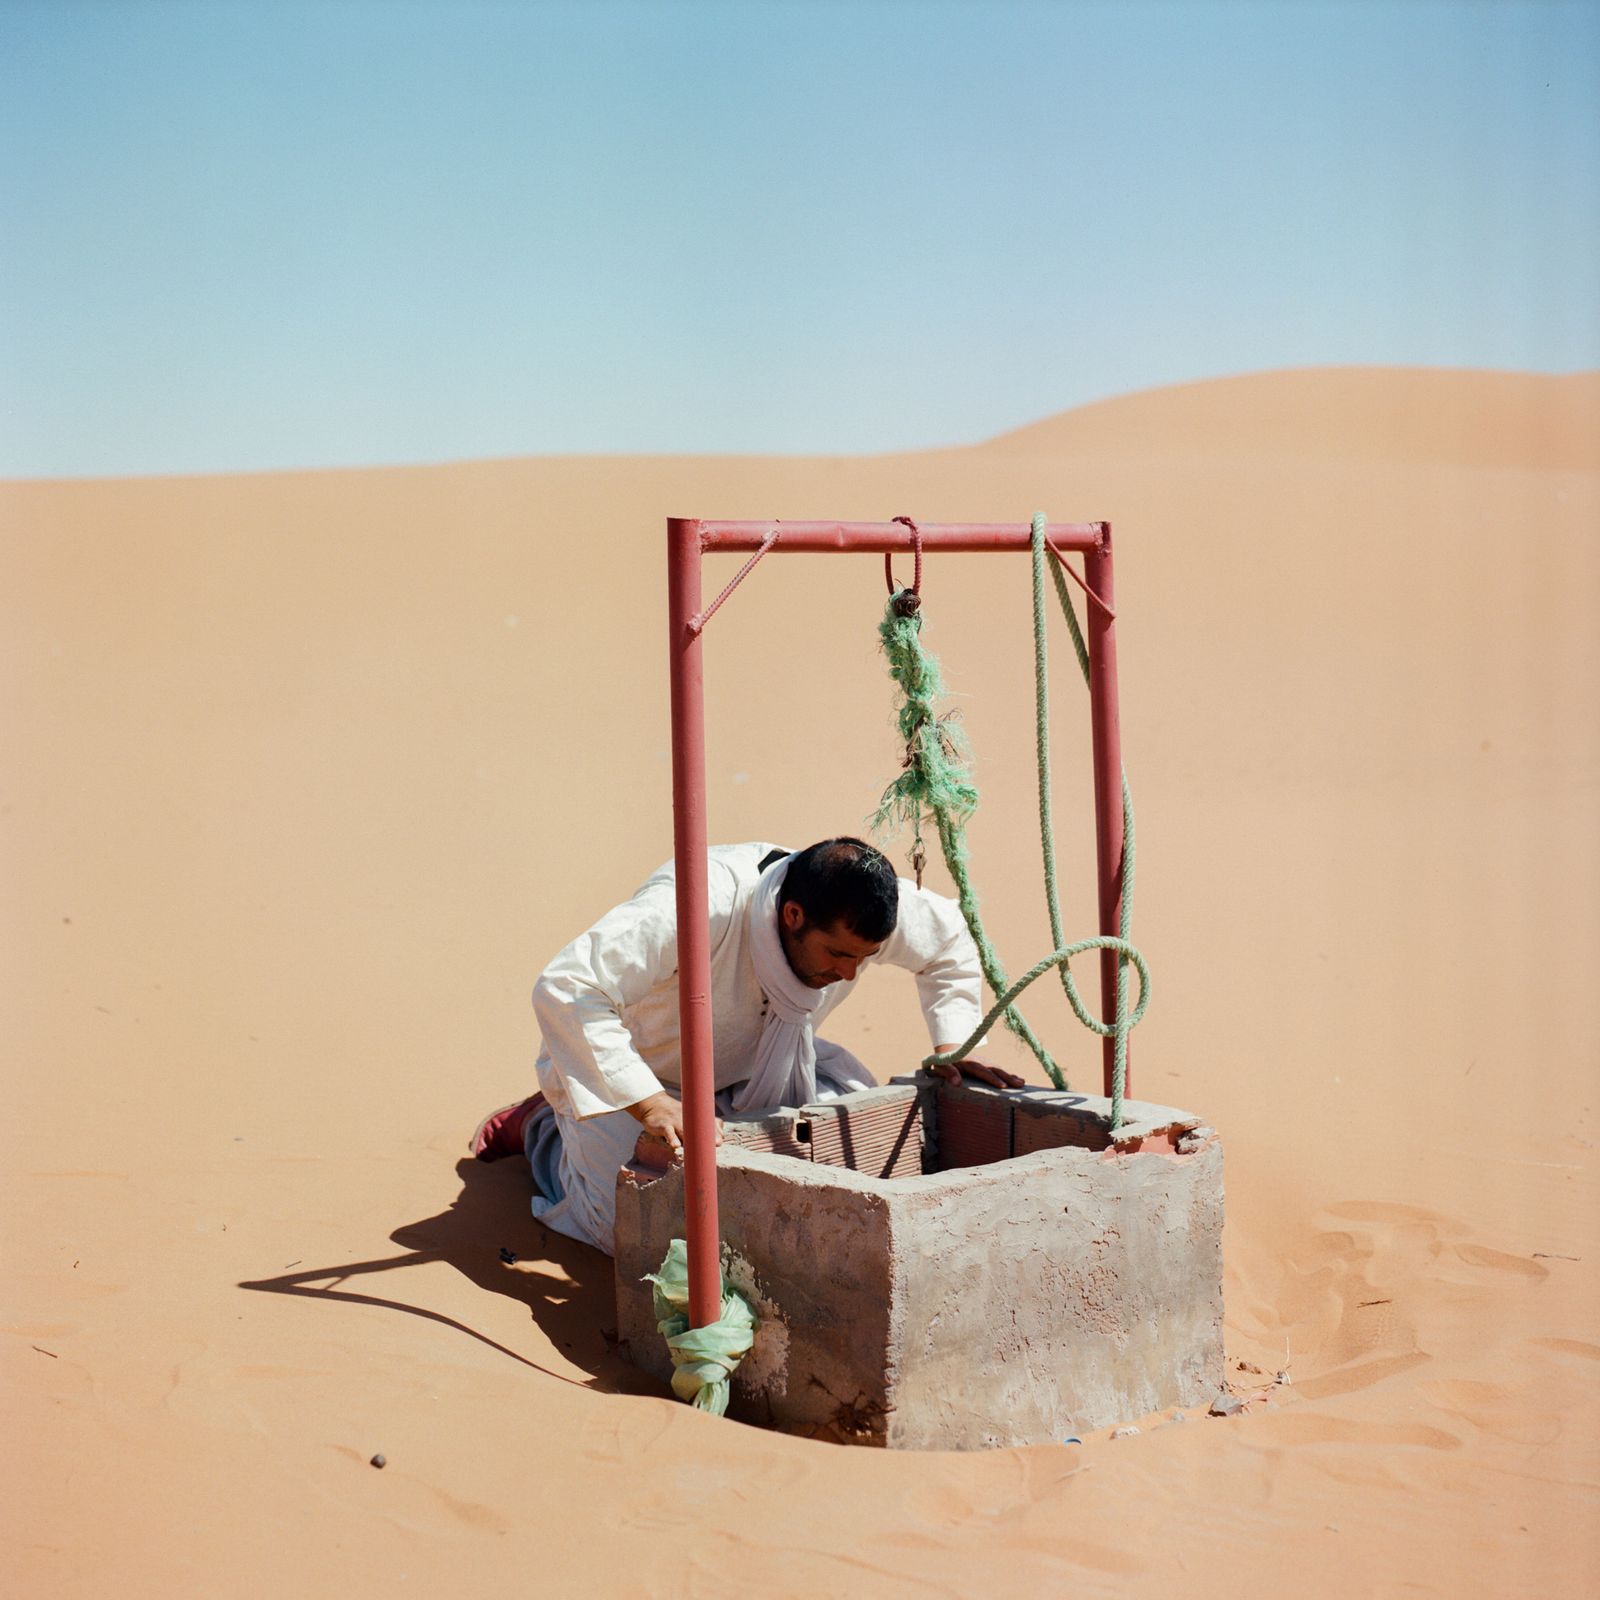 © M'hammed Kilito - A man looking for water in a well surrounded by sand dunes at the oasis of Merzouga